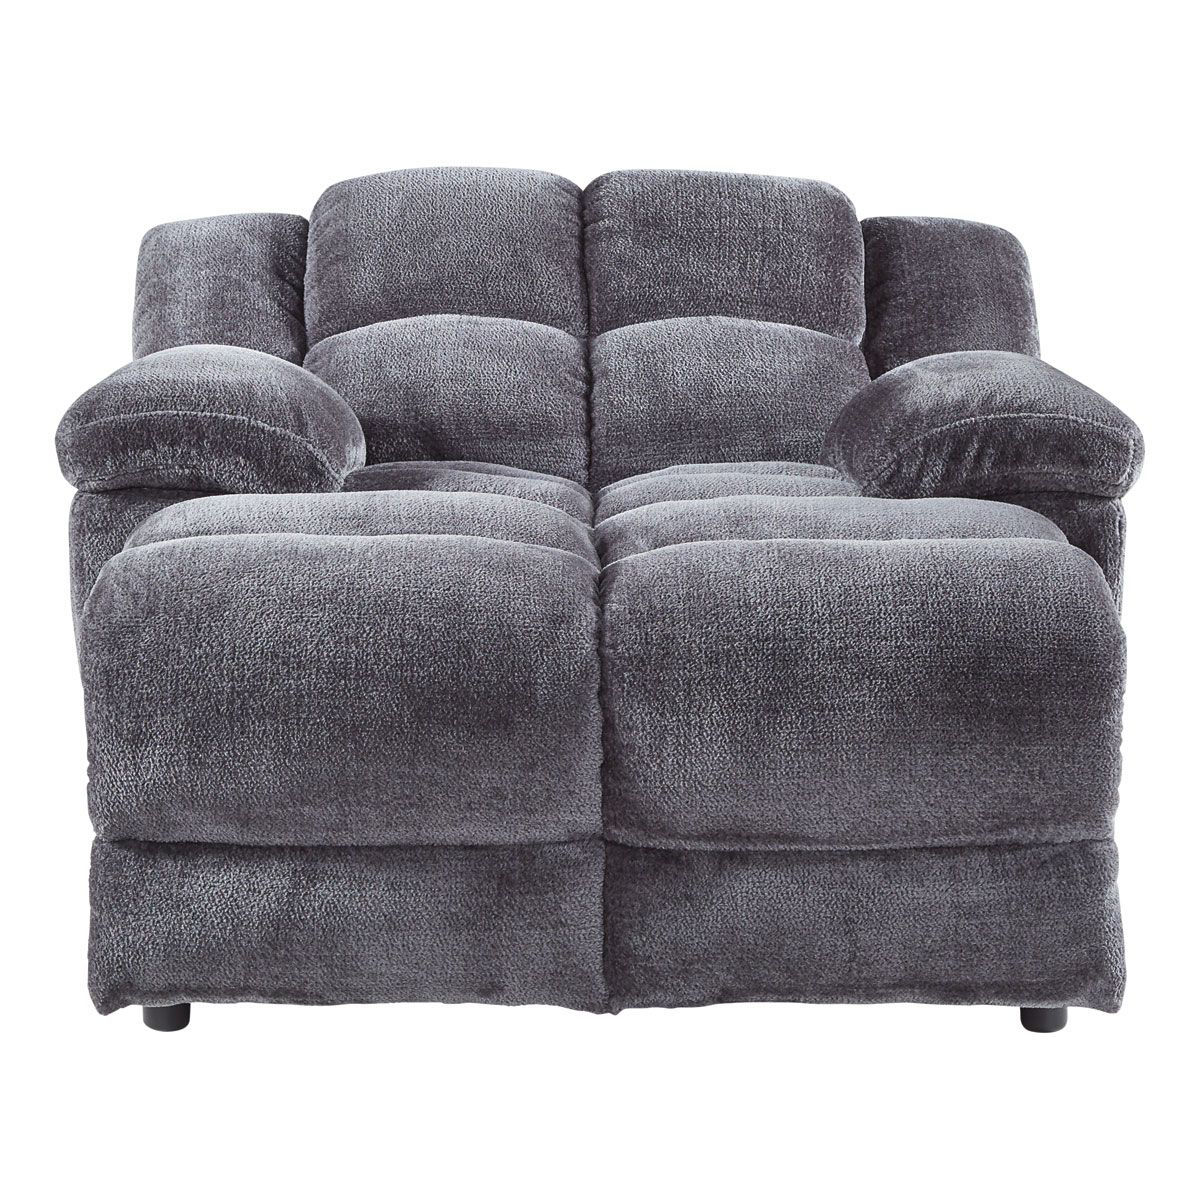 SHELBY RECLINING CHAISE LOUNGE | Badcock Home Furniture &more